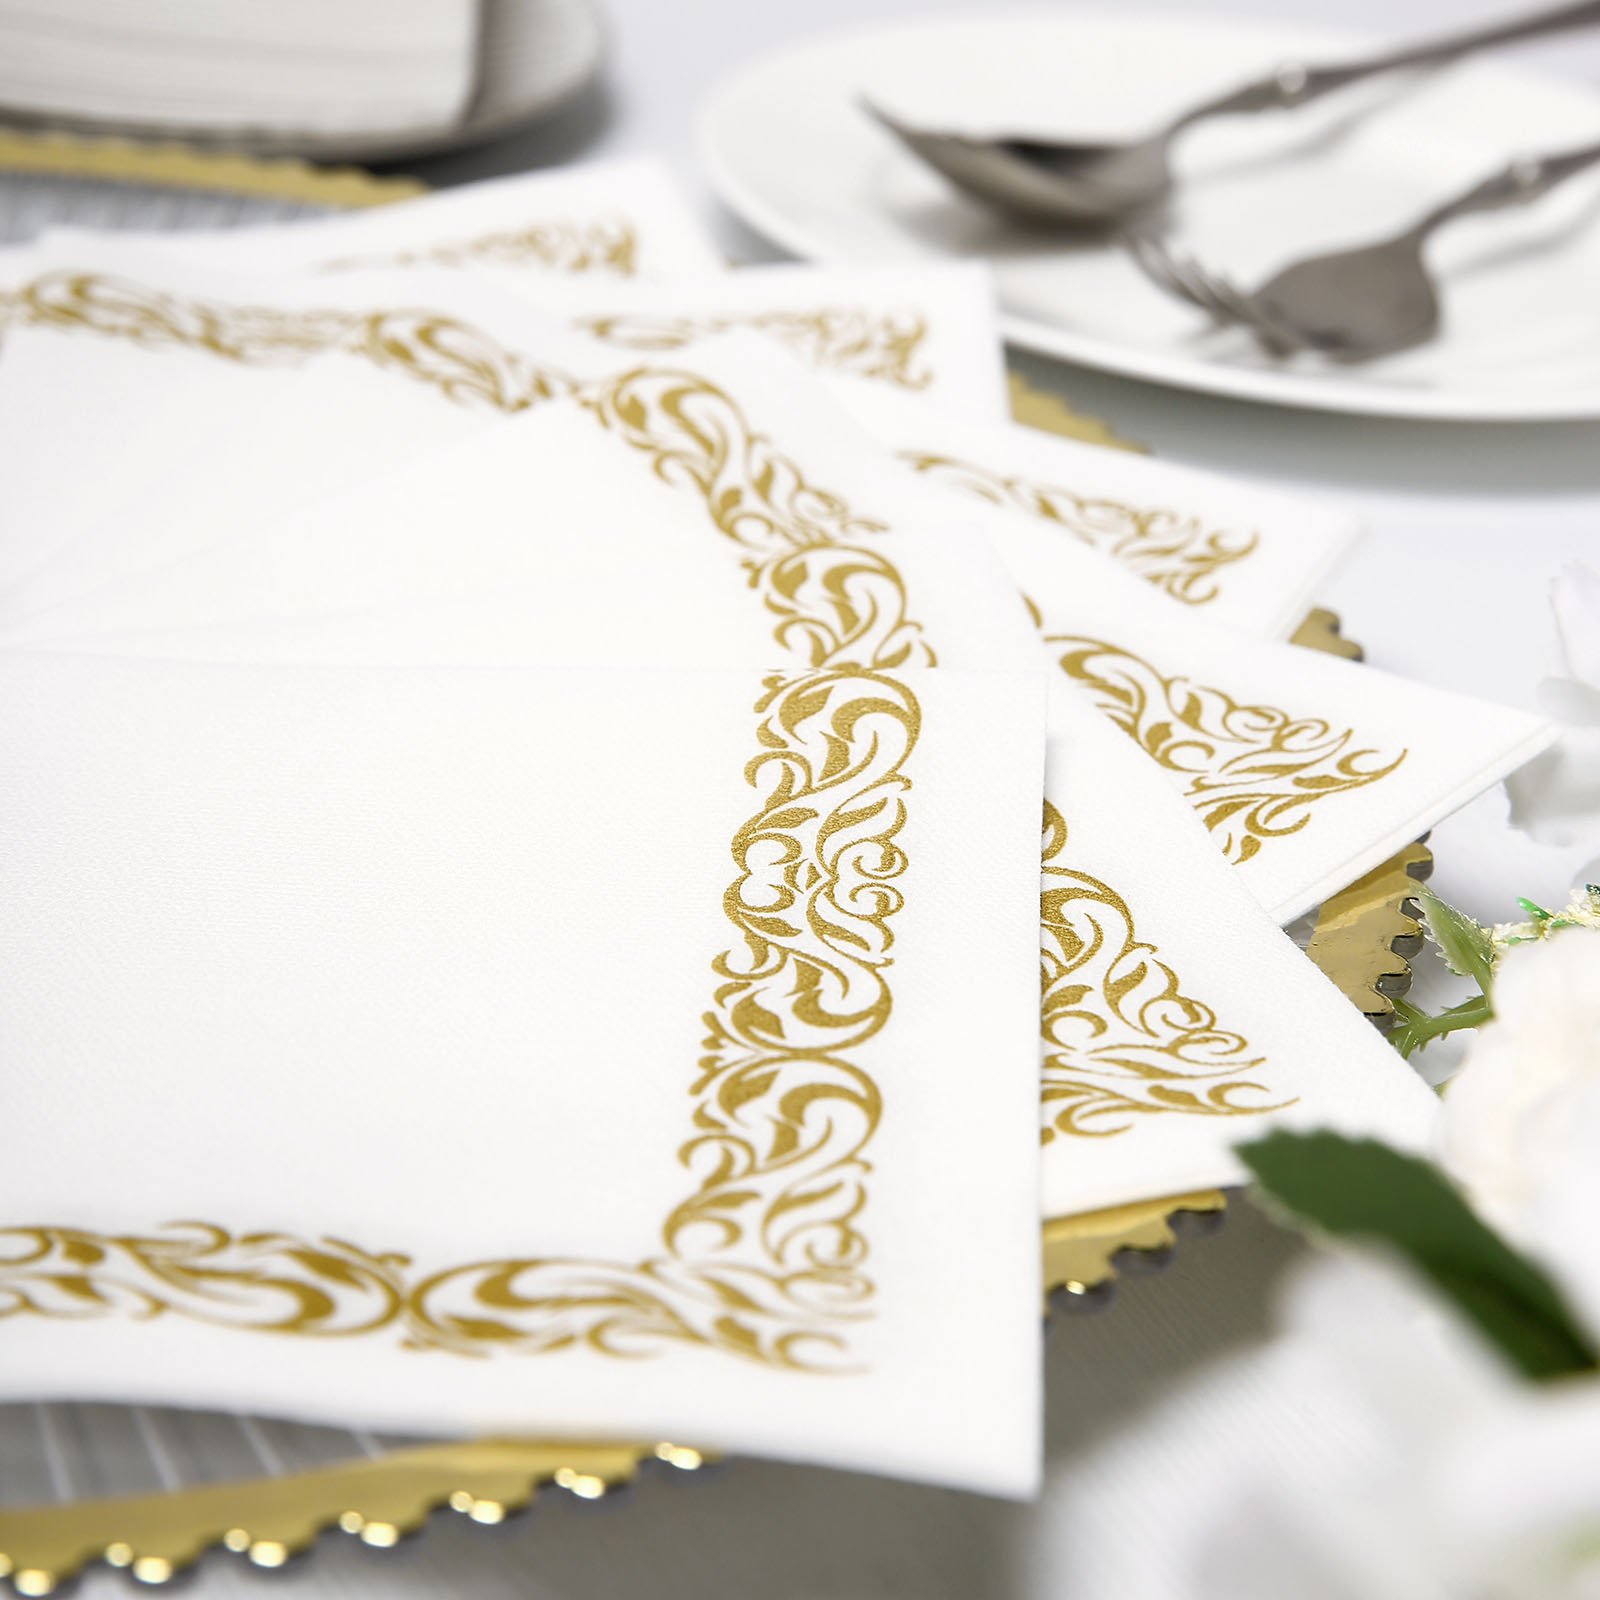 Durable Hotel /& Home Use Luxuriously Soft /& Hotel Quality Table Napkins 12 Pack WHITE Restaurant Washable /& Reusable Fabric Napkin with Hemmed Edges Adler Extra-Large Cloth Dinner Napkins 22 x 22 Inch Perfect for Events Banquet J